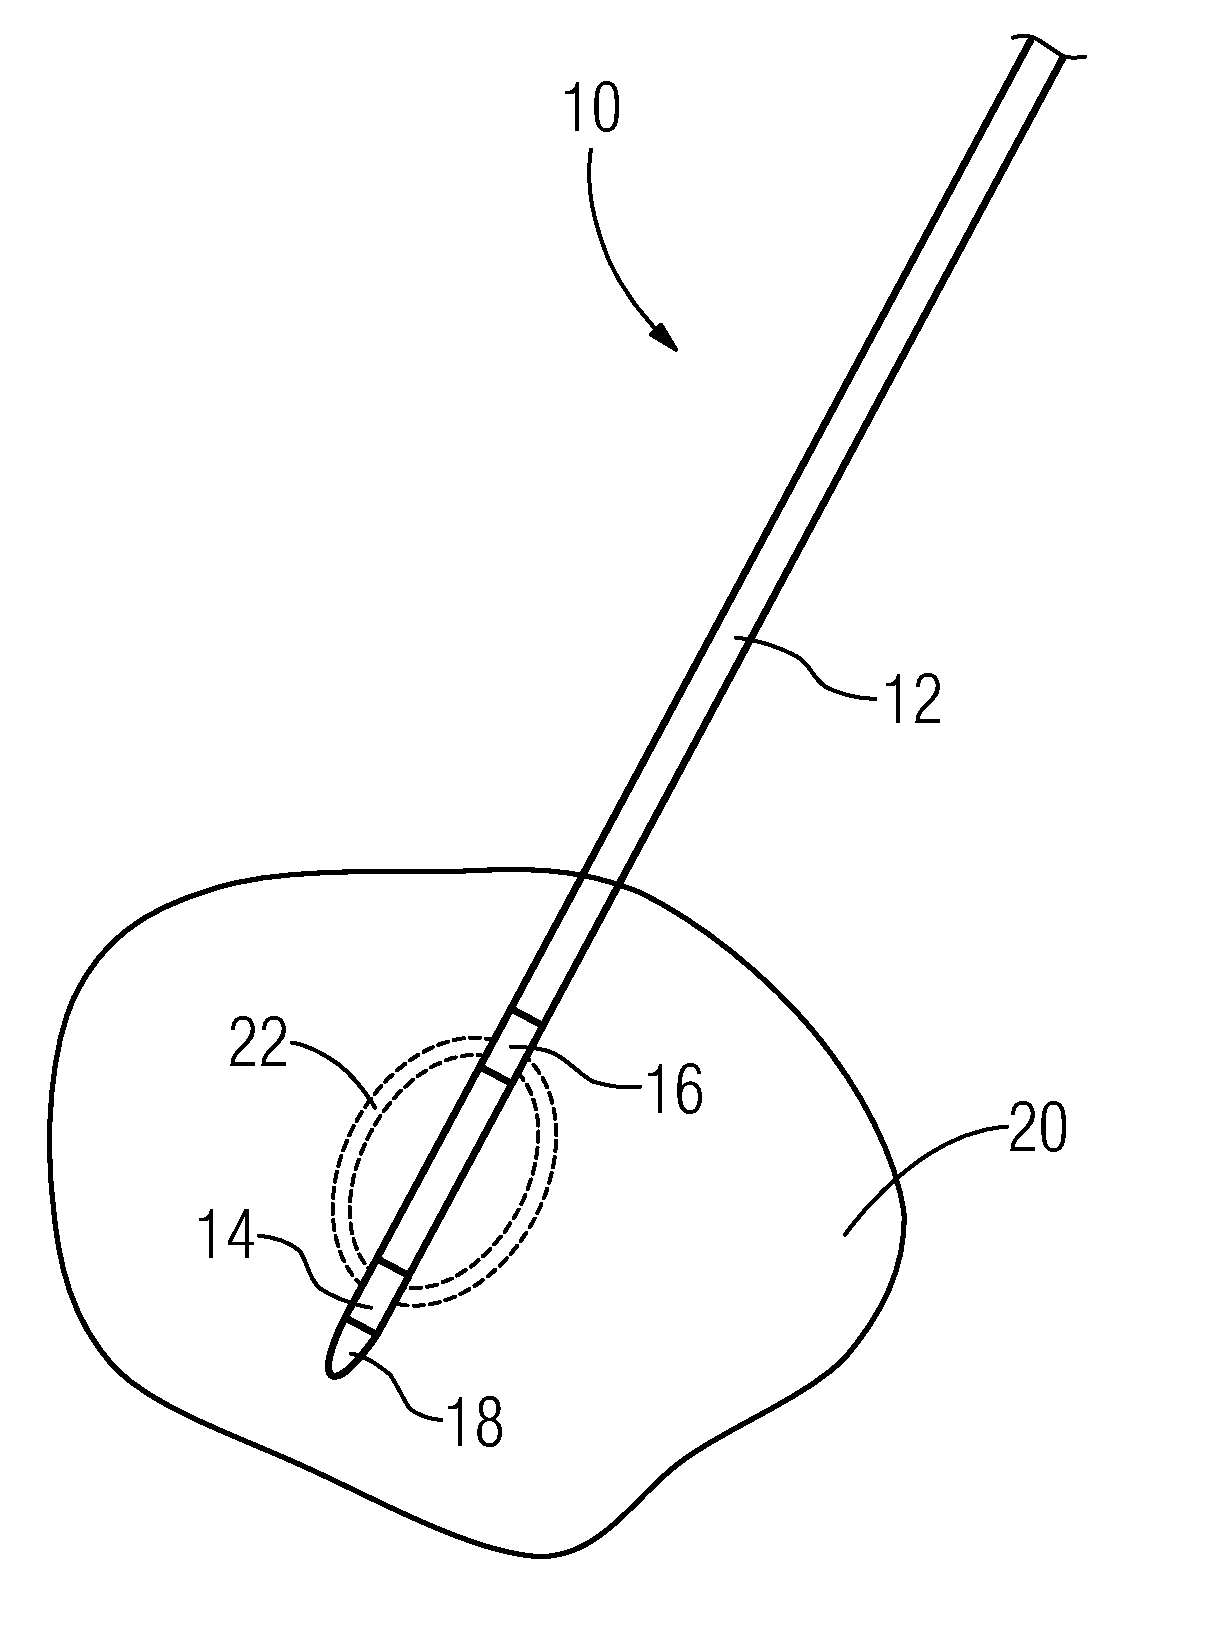 Method for obtaining information on food stuff in or for a cooking process